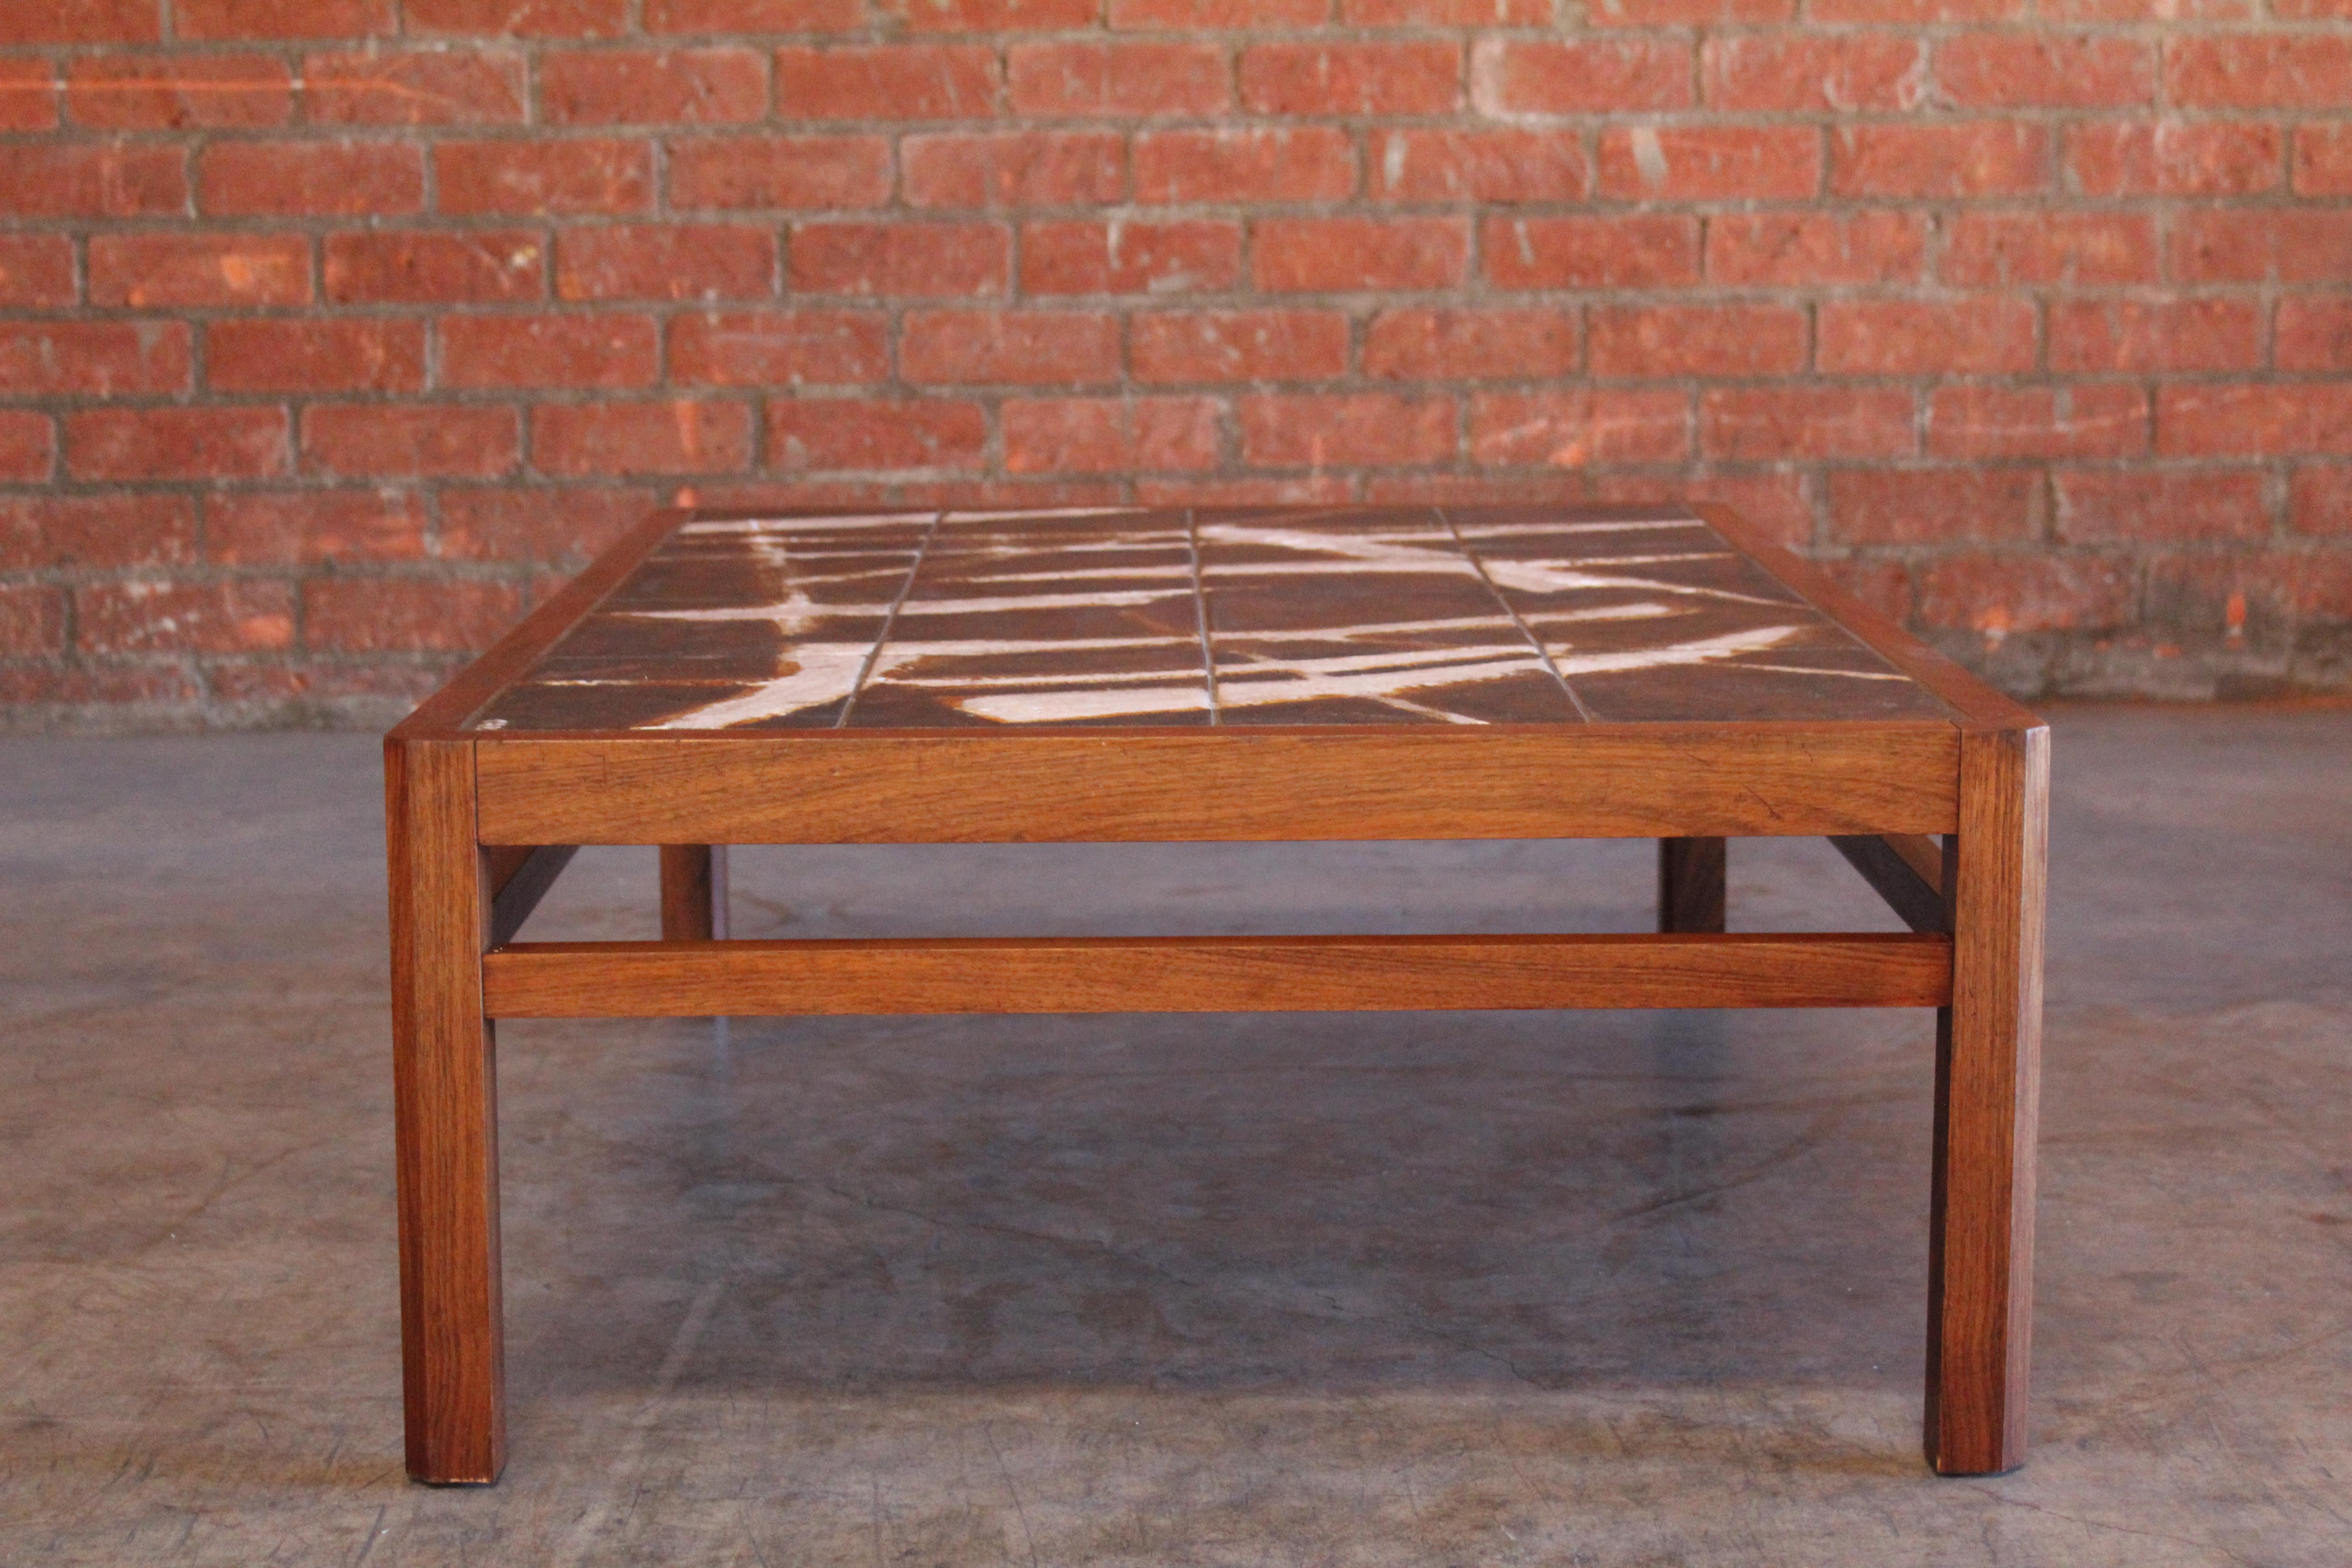 Danish Rosewood and Ceramic Tile Coffee Table by Ole Bjorn Krüger, 1960s For Sale 9